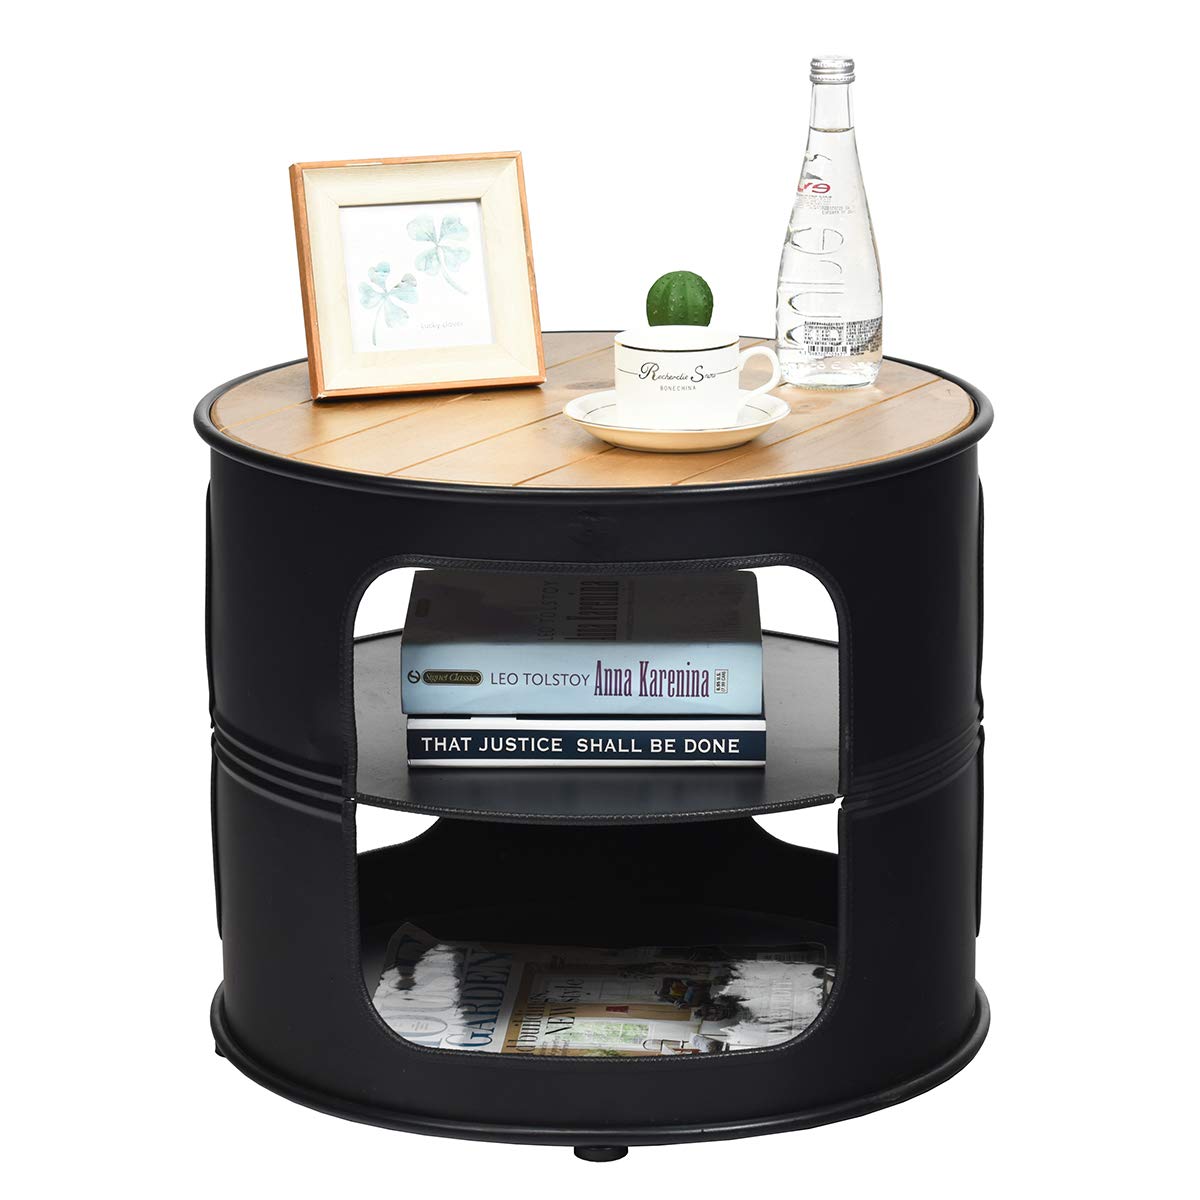 End Side Table, 3-Tier Round Coffee Table with 2 Storage Shelves, Nightstand Unit Desk Bedside Table